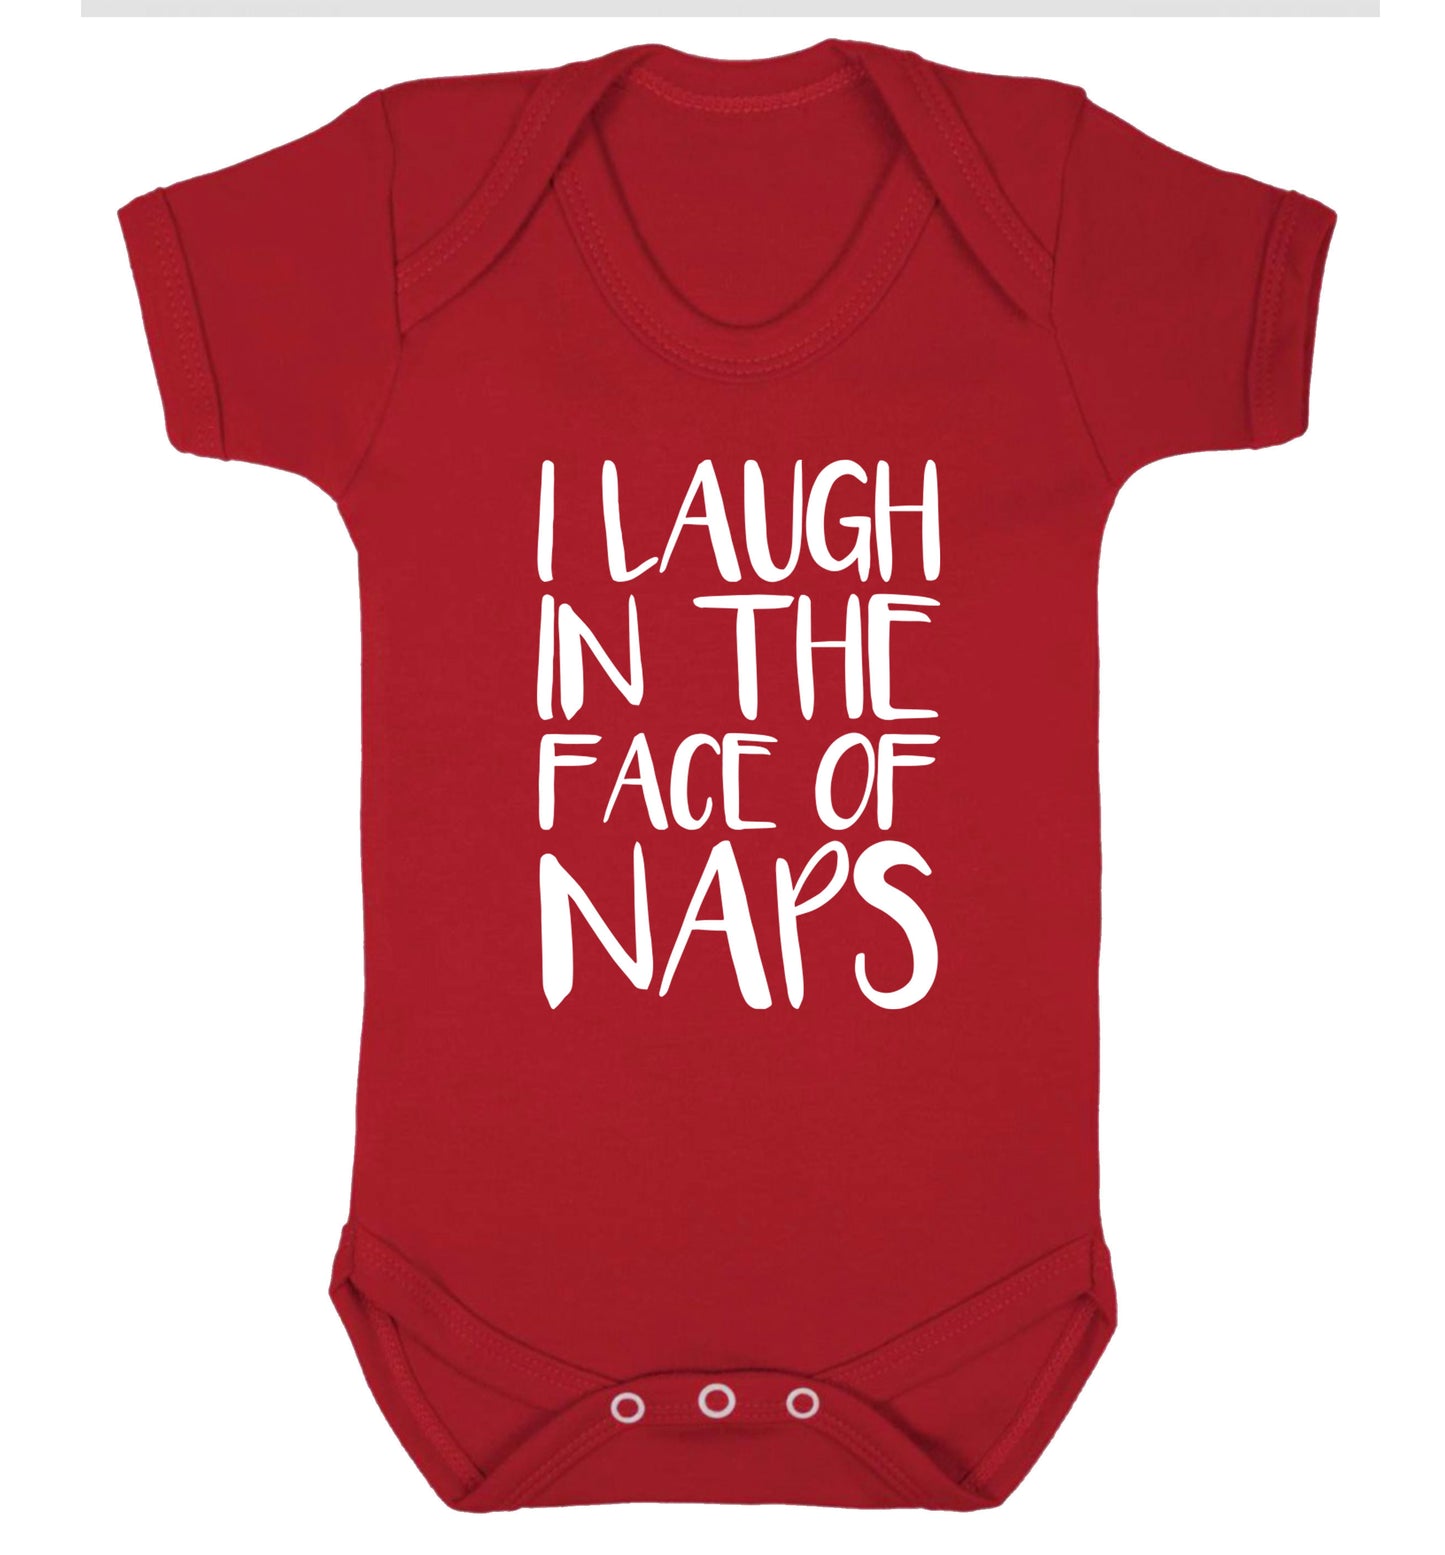 I laugh in the face of naps Baby Vest red 18-24 months